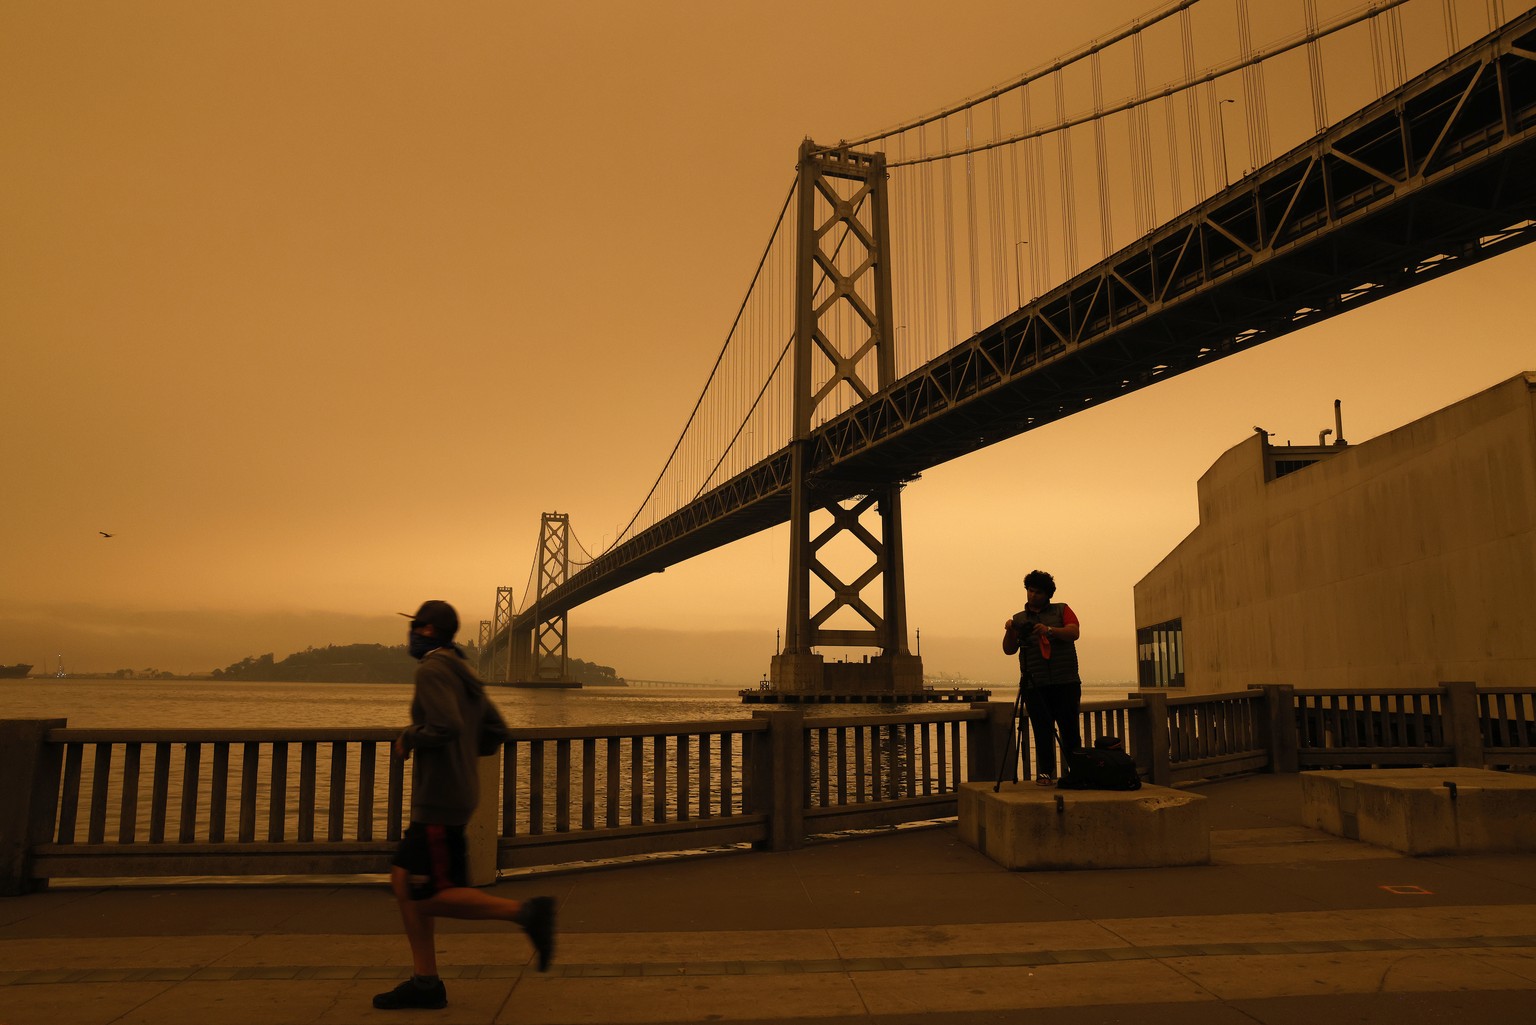 epa08657795 A view of the San Francisco Bay Bridge under an orange overcast sky in the afternoon in San Francisco, California, USA, 09 September 2020. California wildfire smoke high in the atmosphere  ...